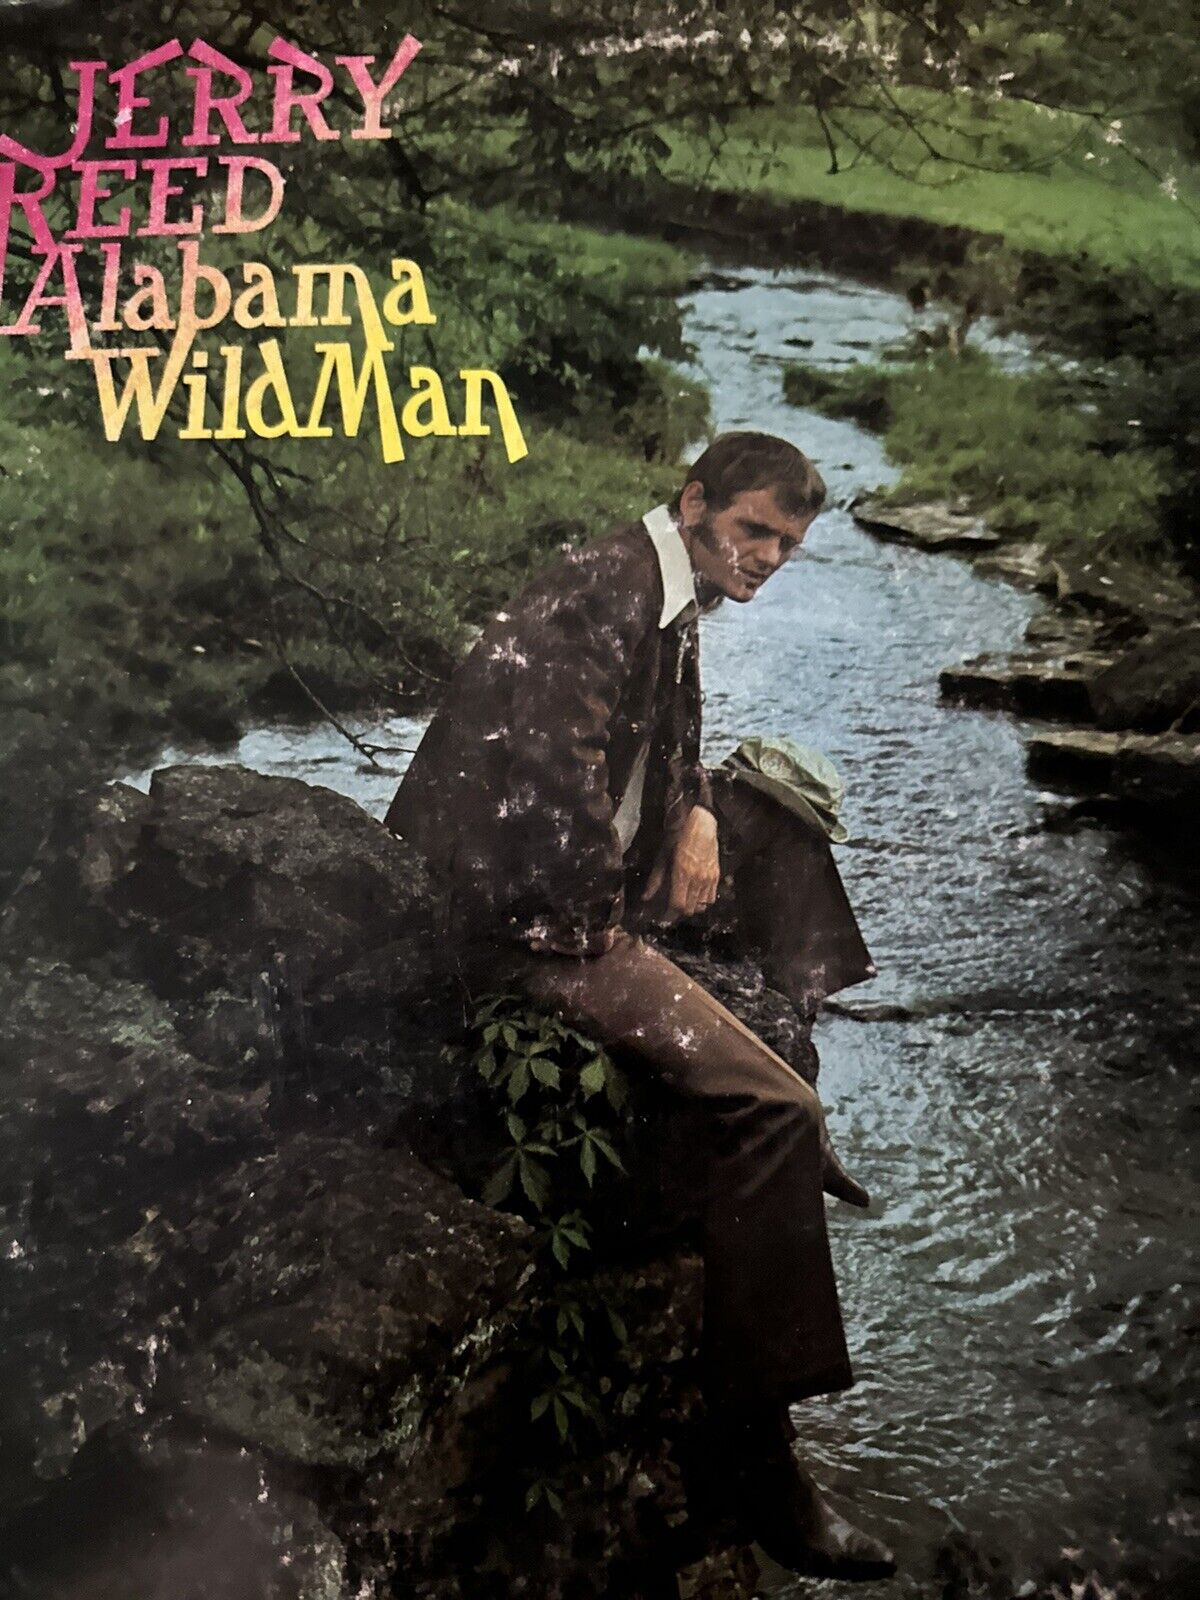 Jerry Reed - Alabama Wild Man LP, Comp Pickwick ACL-7024 1976 US